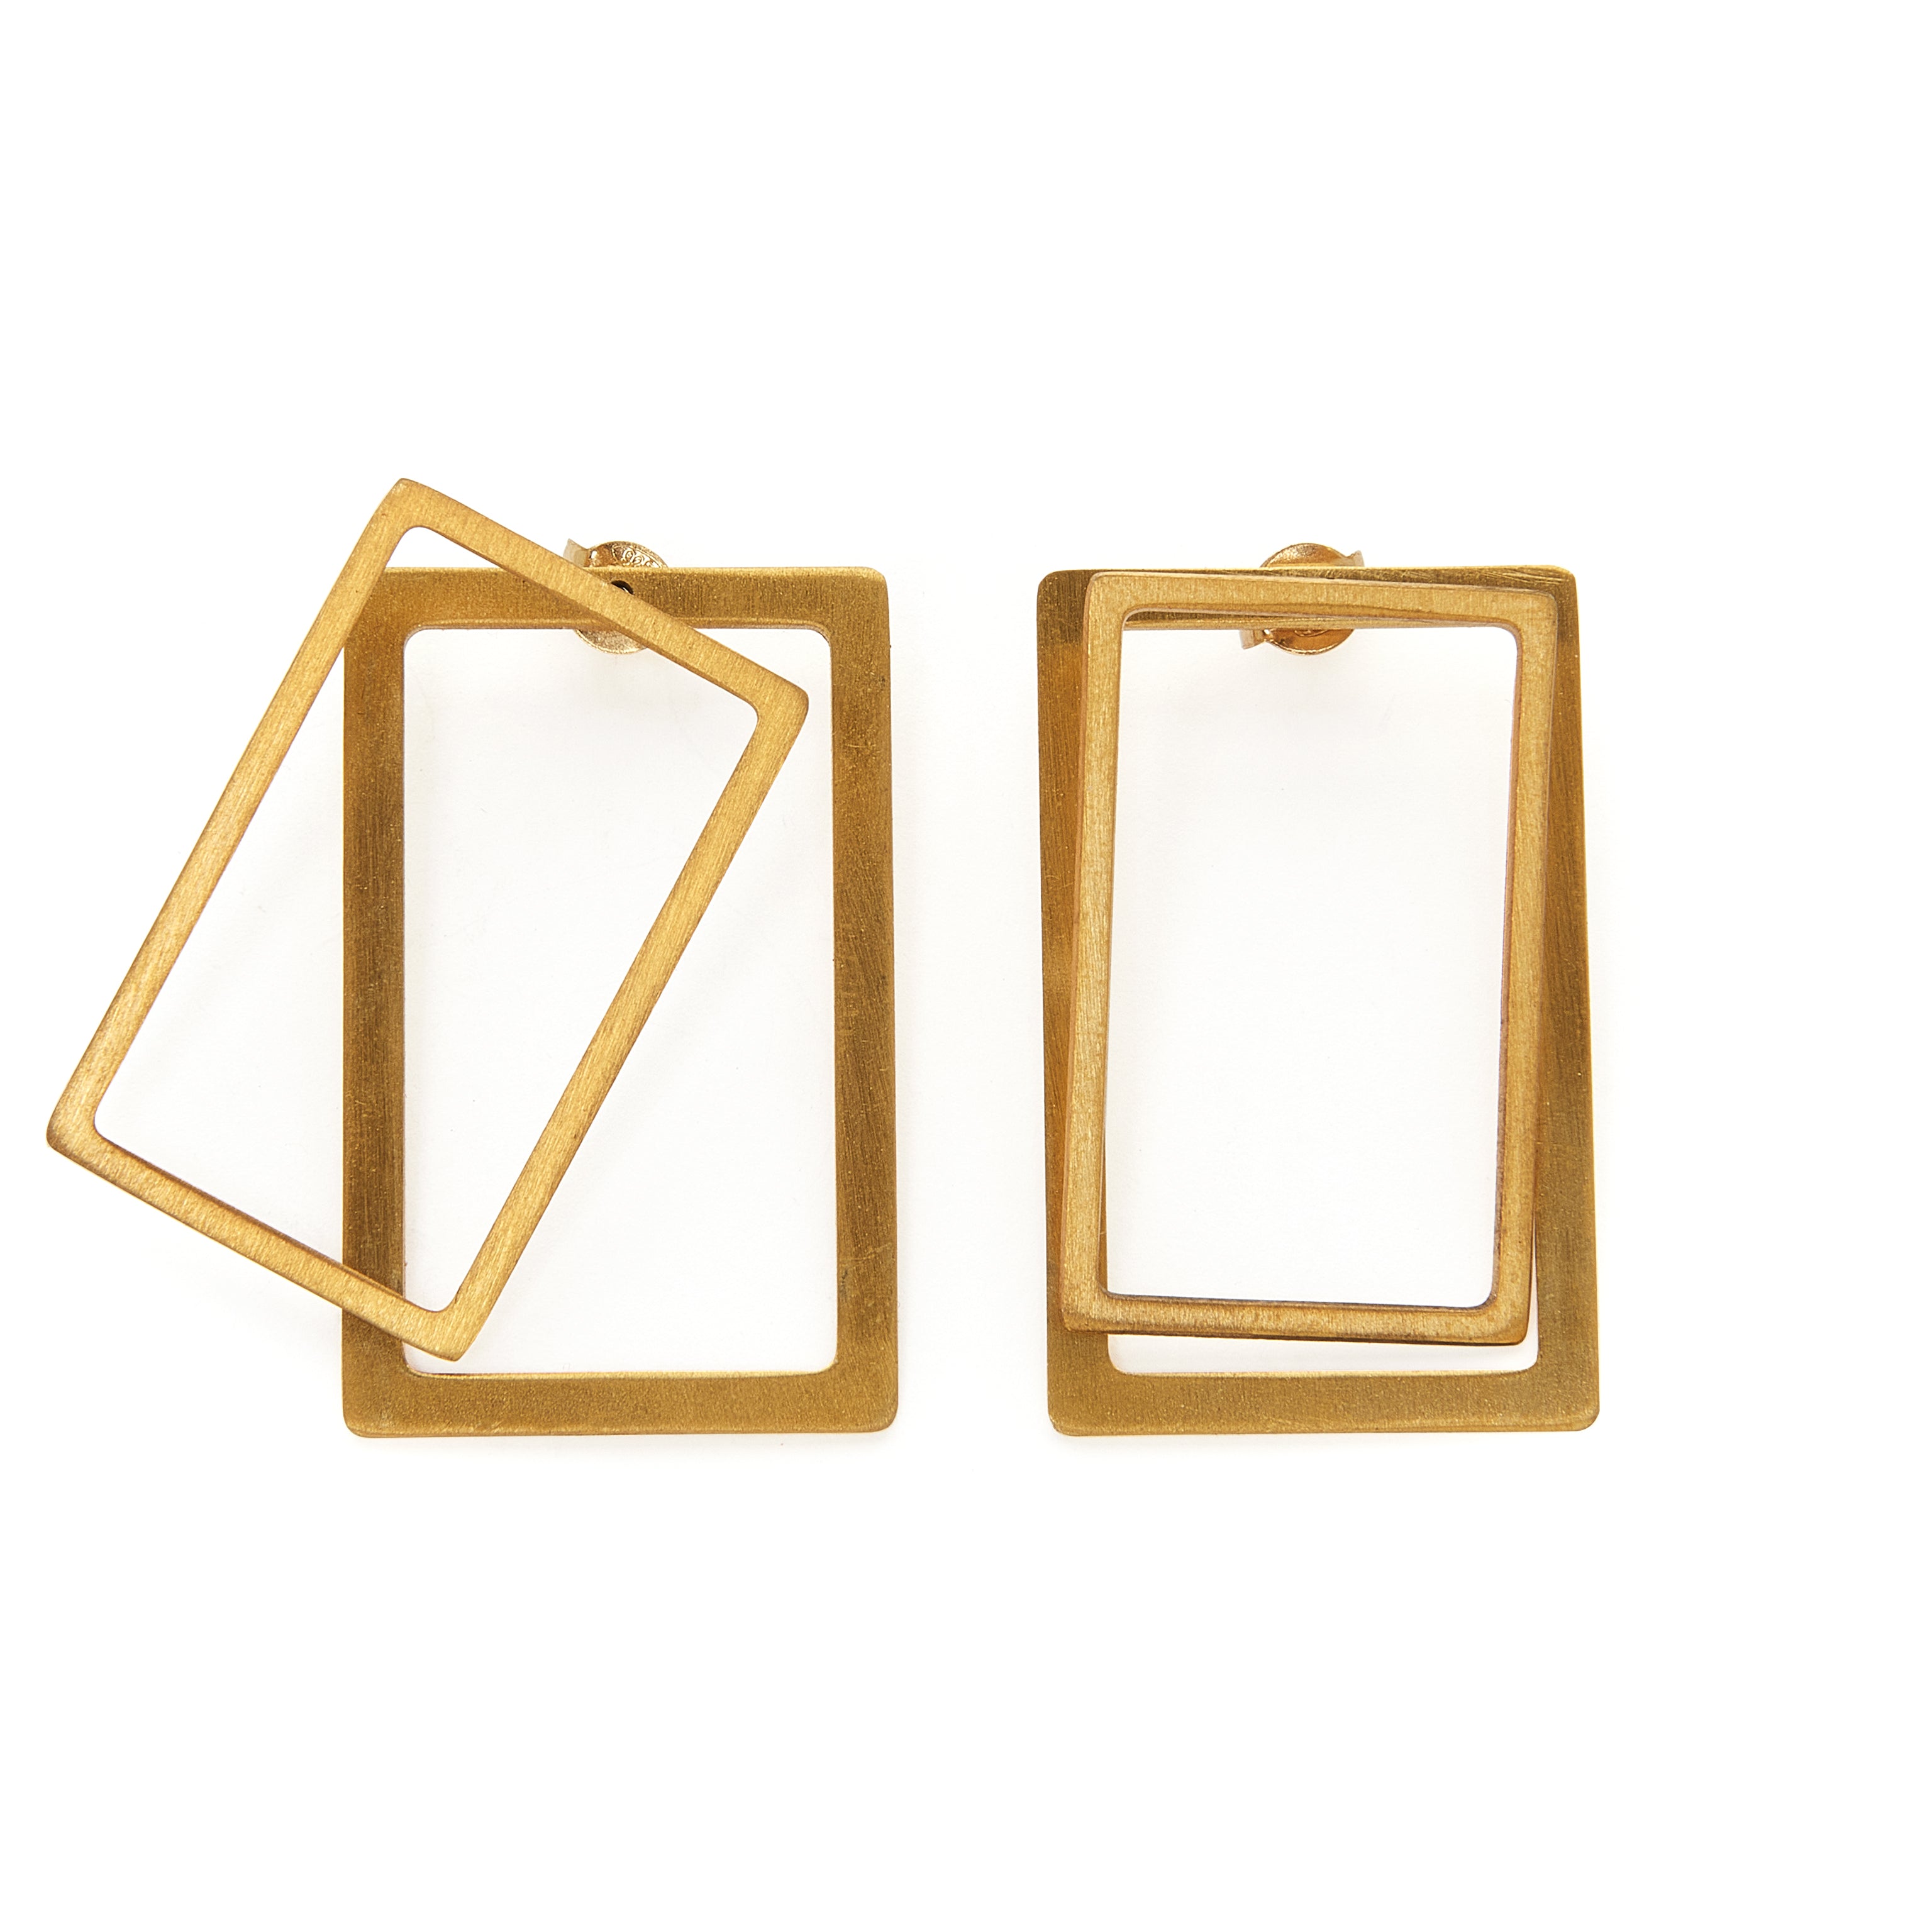 Rectangle ear jacket earrings in silver 925 or brass, gold-plated or platinum-plated that can be worn in more than one configuration. Wear these two dimensional front and back earrings in the front of the ear for a classy statement, wear just the front geometric stud earrings for a minimal look or add the back earrings for a special and unique look